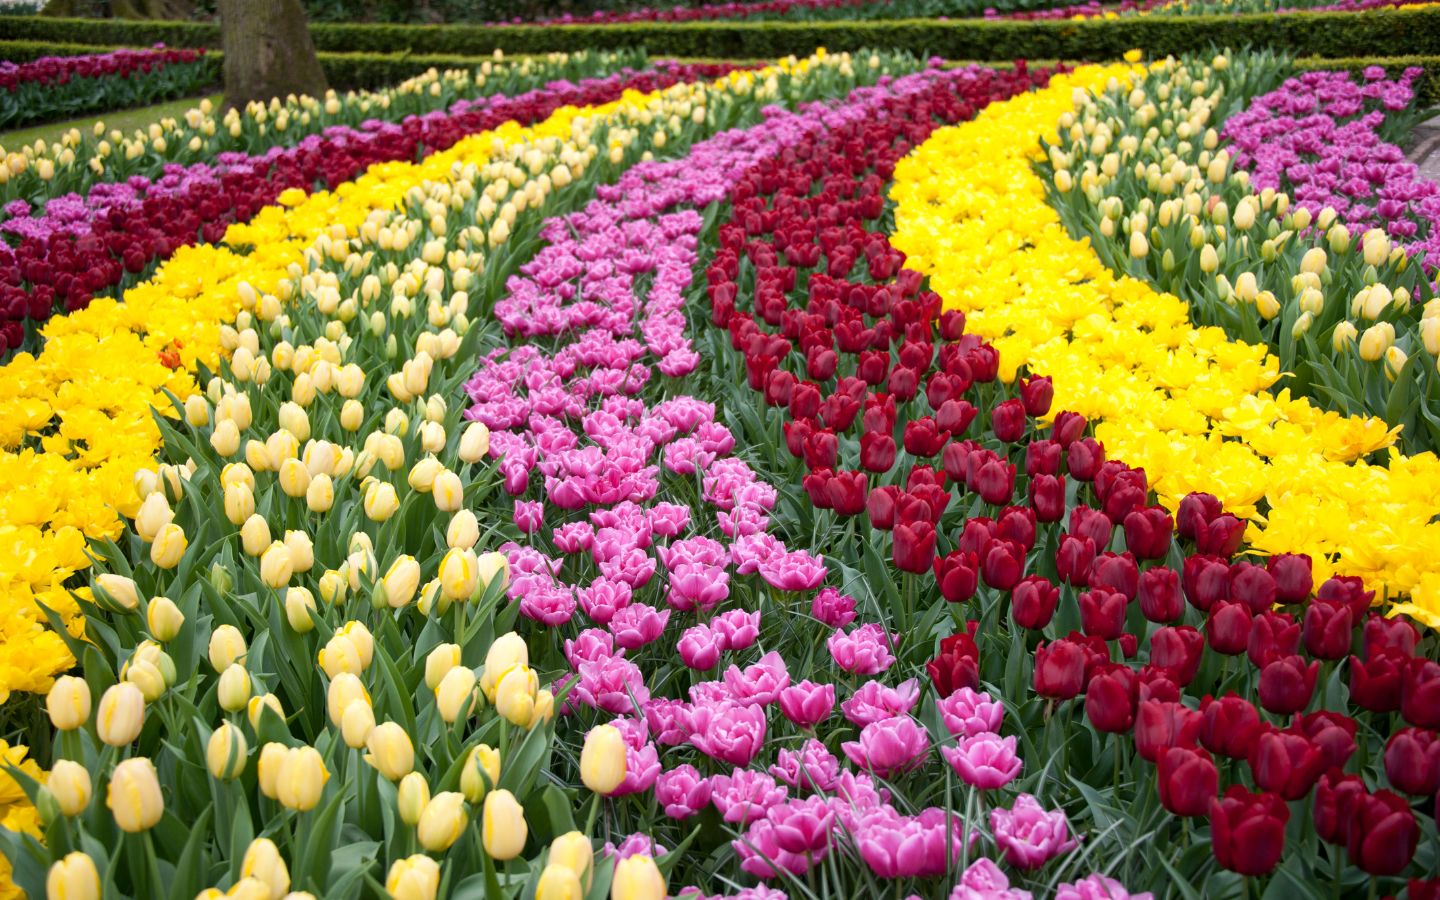 curved rows of blooming tulips in yellow, red, and pink colors